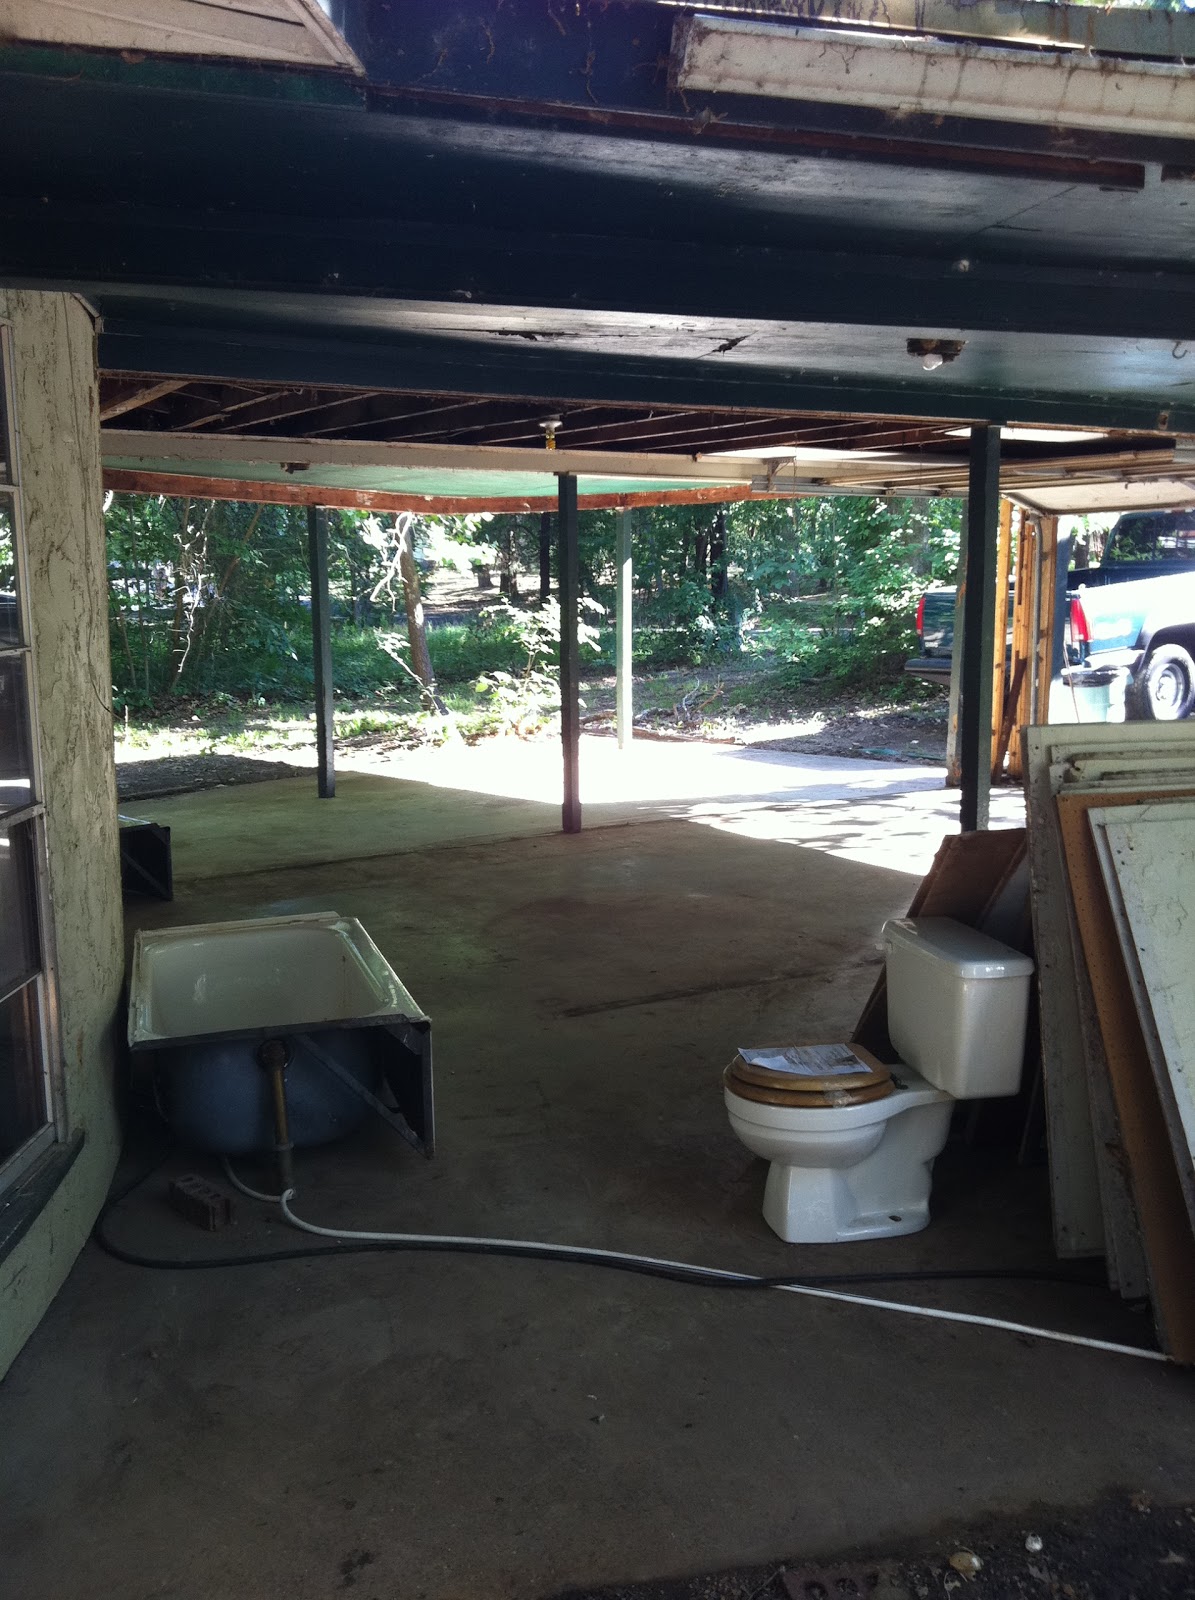 My Texas Round House: Carport repairs continued....